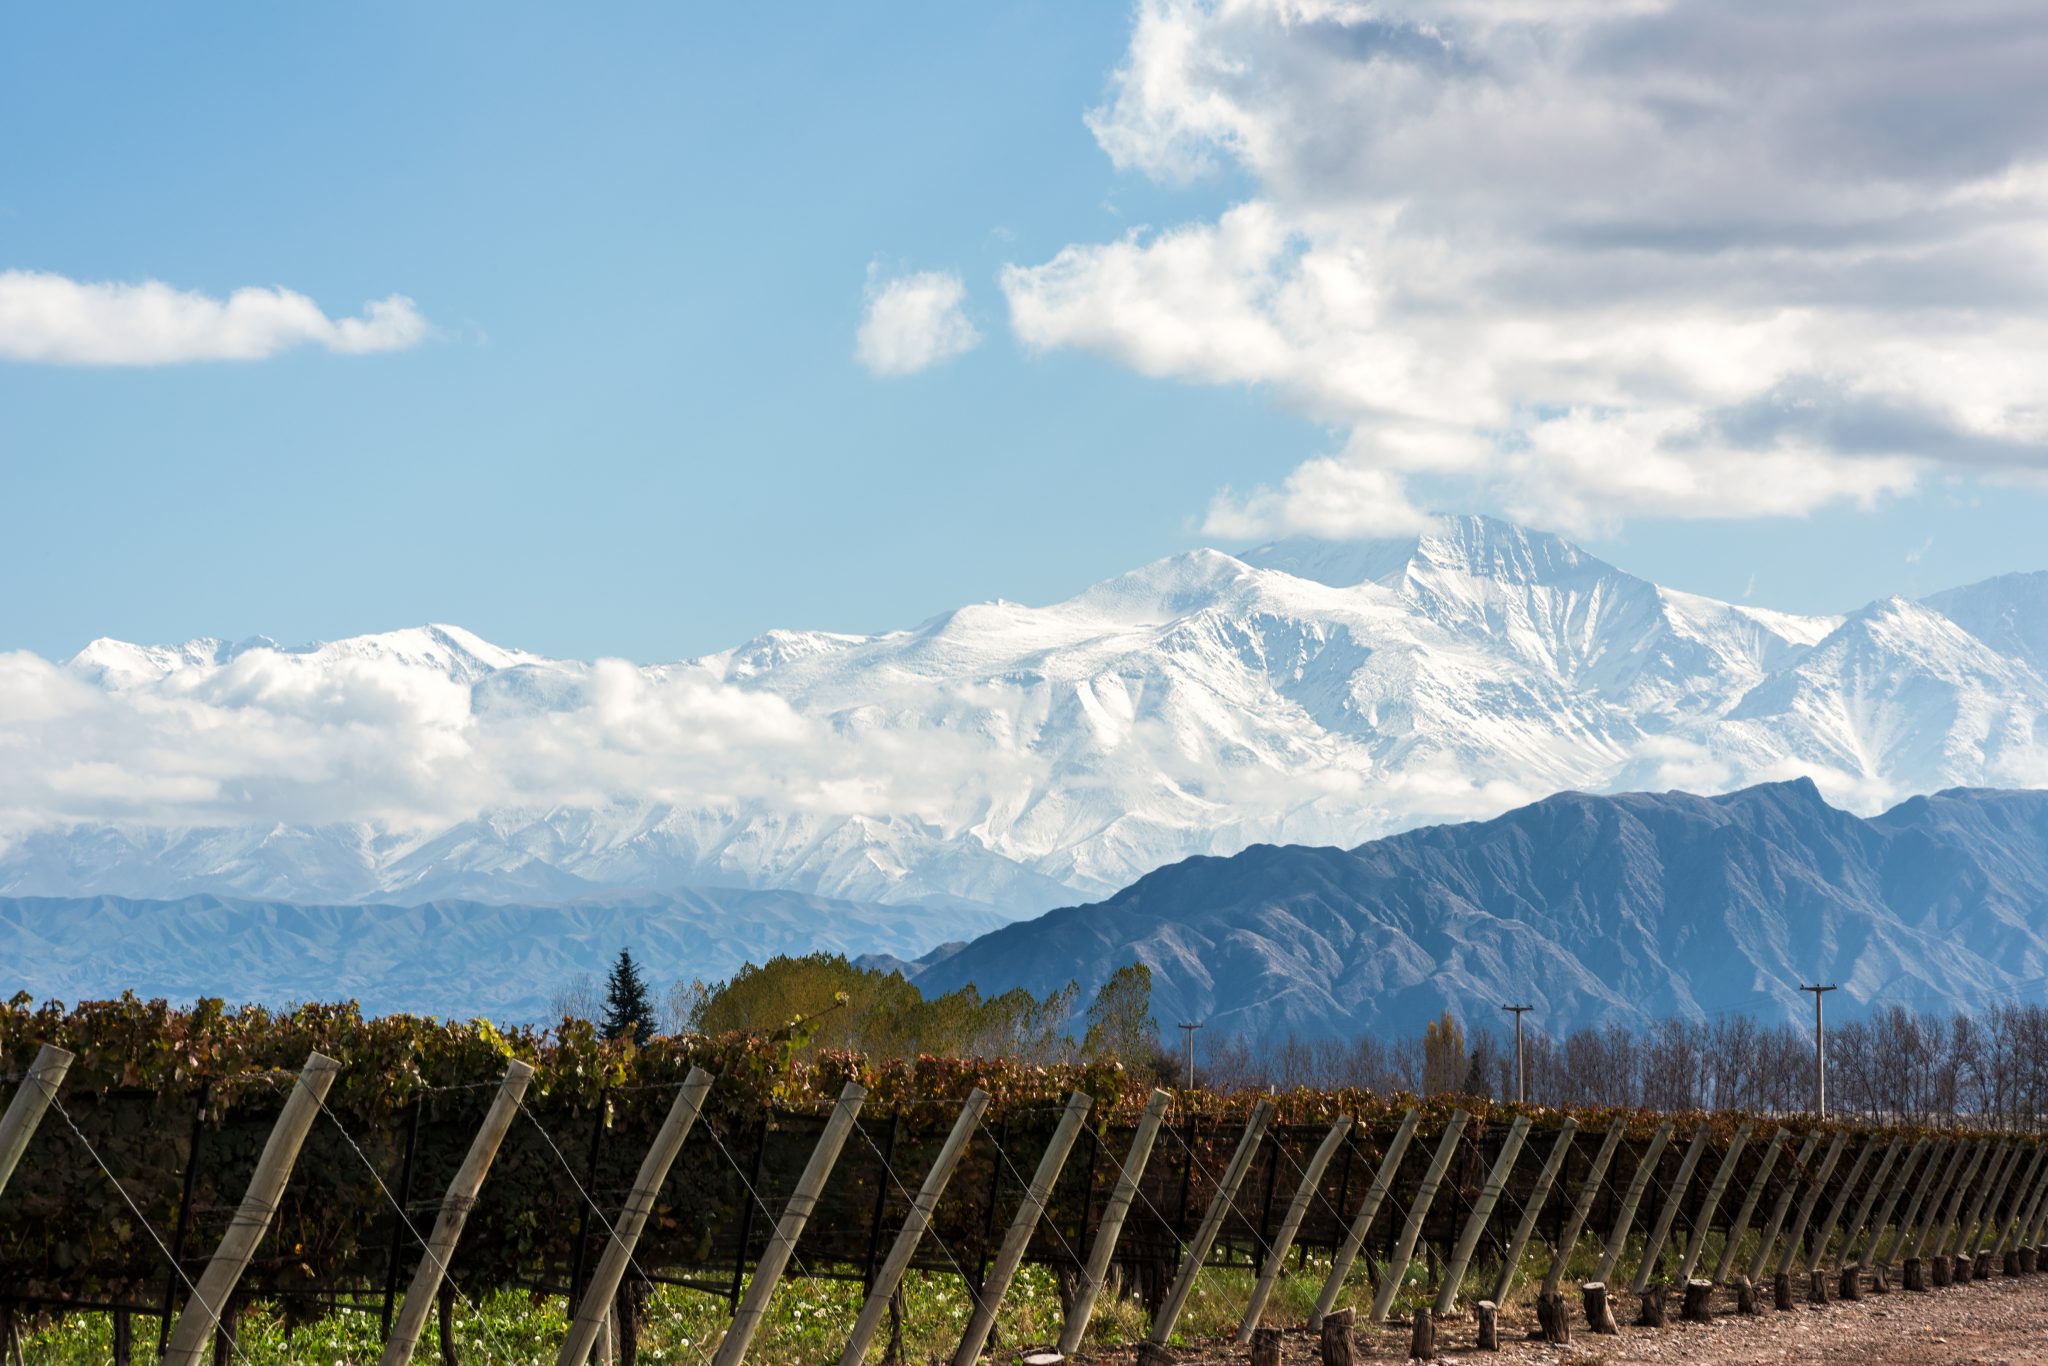 Pictured is a vineyard and the volcano Aconcagua Cordillera, part of the Andes mountain range, in the Argentine province of Mendoza.  Brazil-based travel company CVC Corp. closed a $77 million acquisition of Buenos Aires-based Almundo in November 2019.